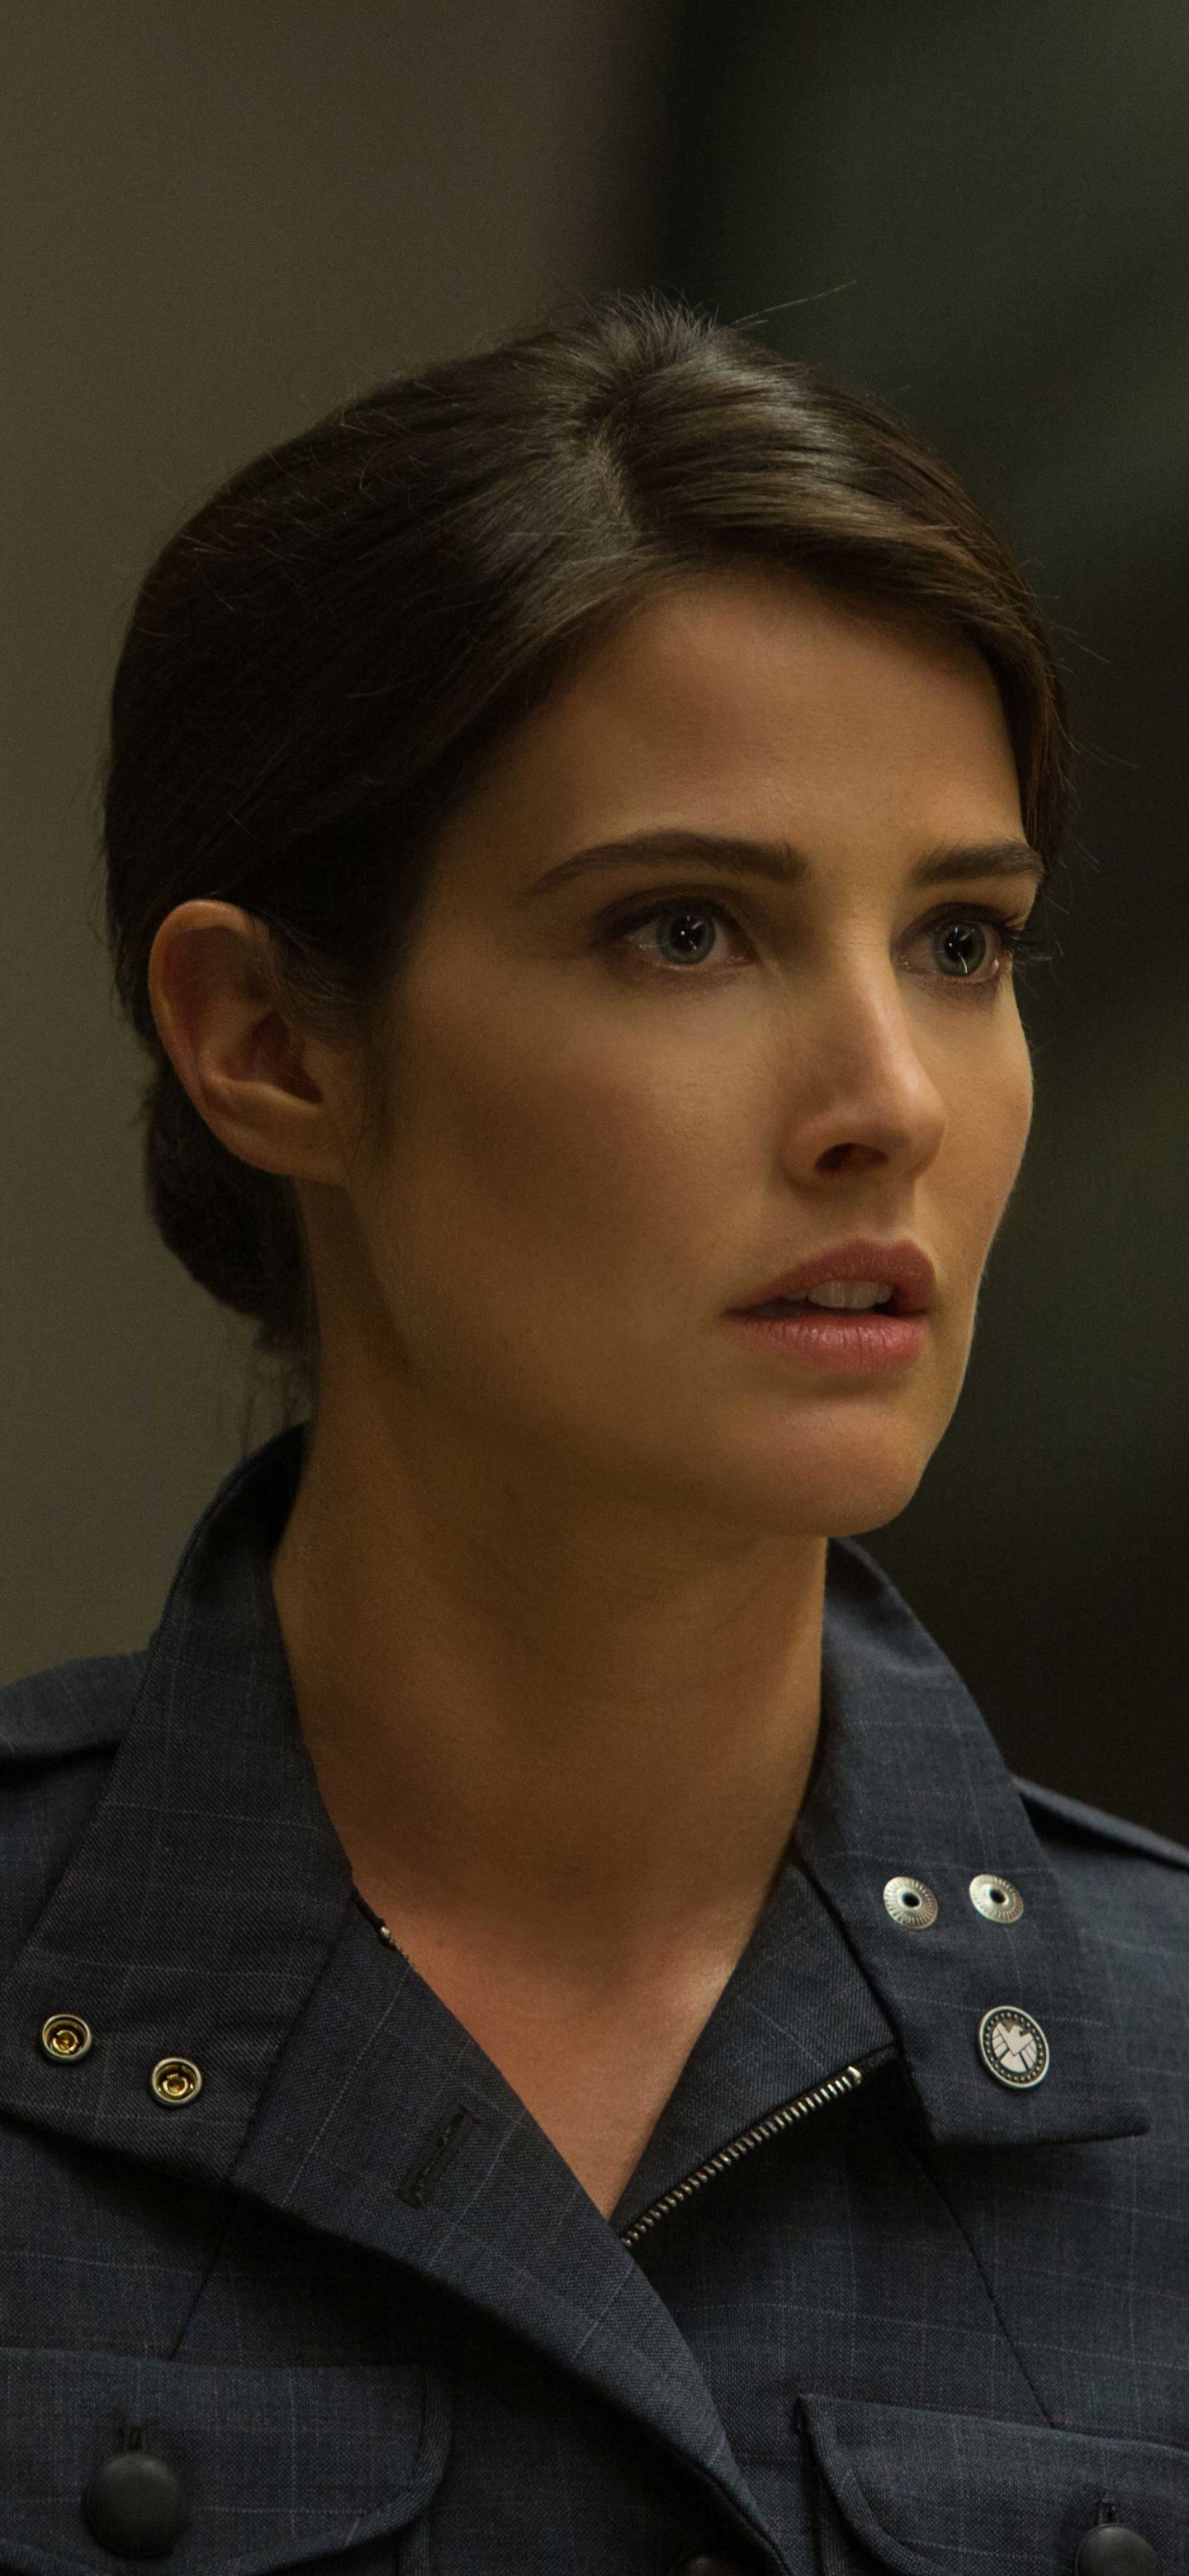 Free HD cobie smulders, movie, captain america: the winter soldier, maria hill, captain america